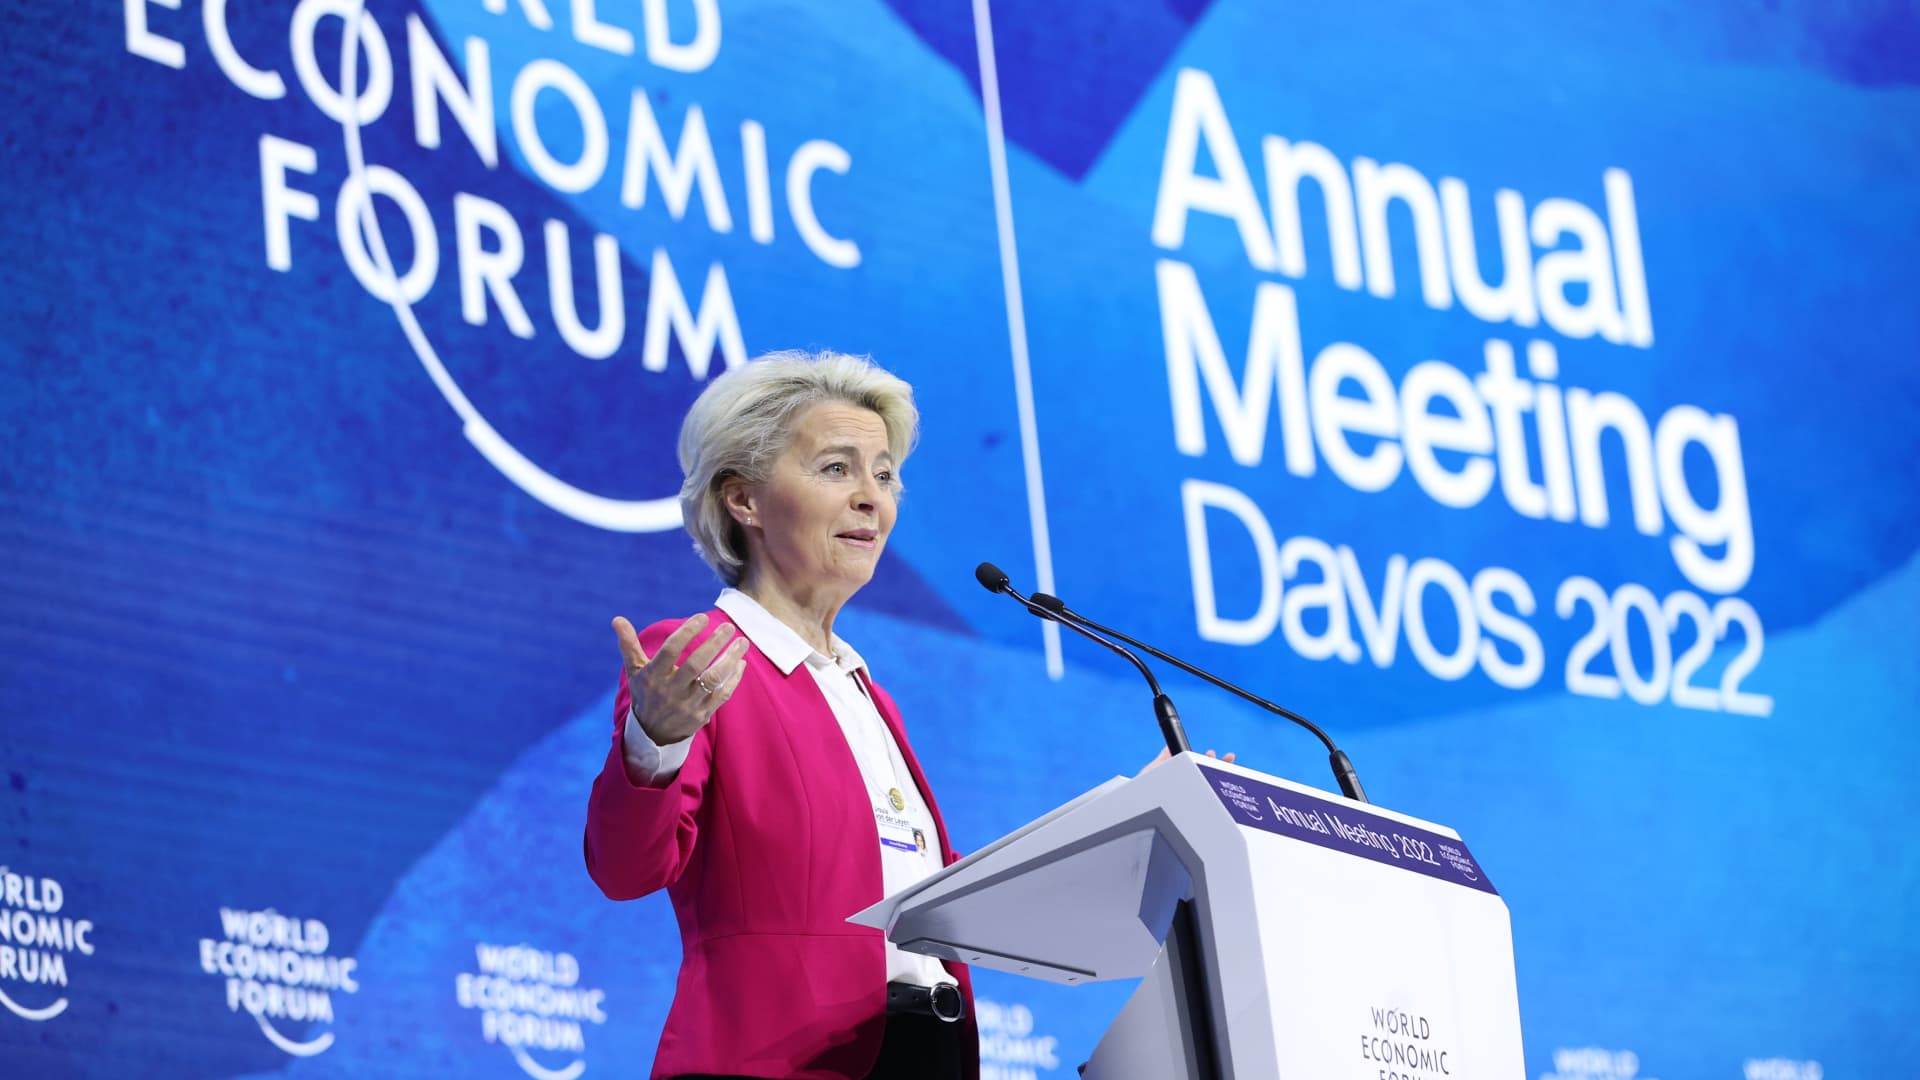 The EU's von der Leyen has said the bloc must address its dependency on Russian oil.